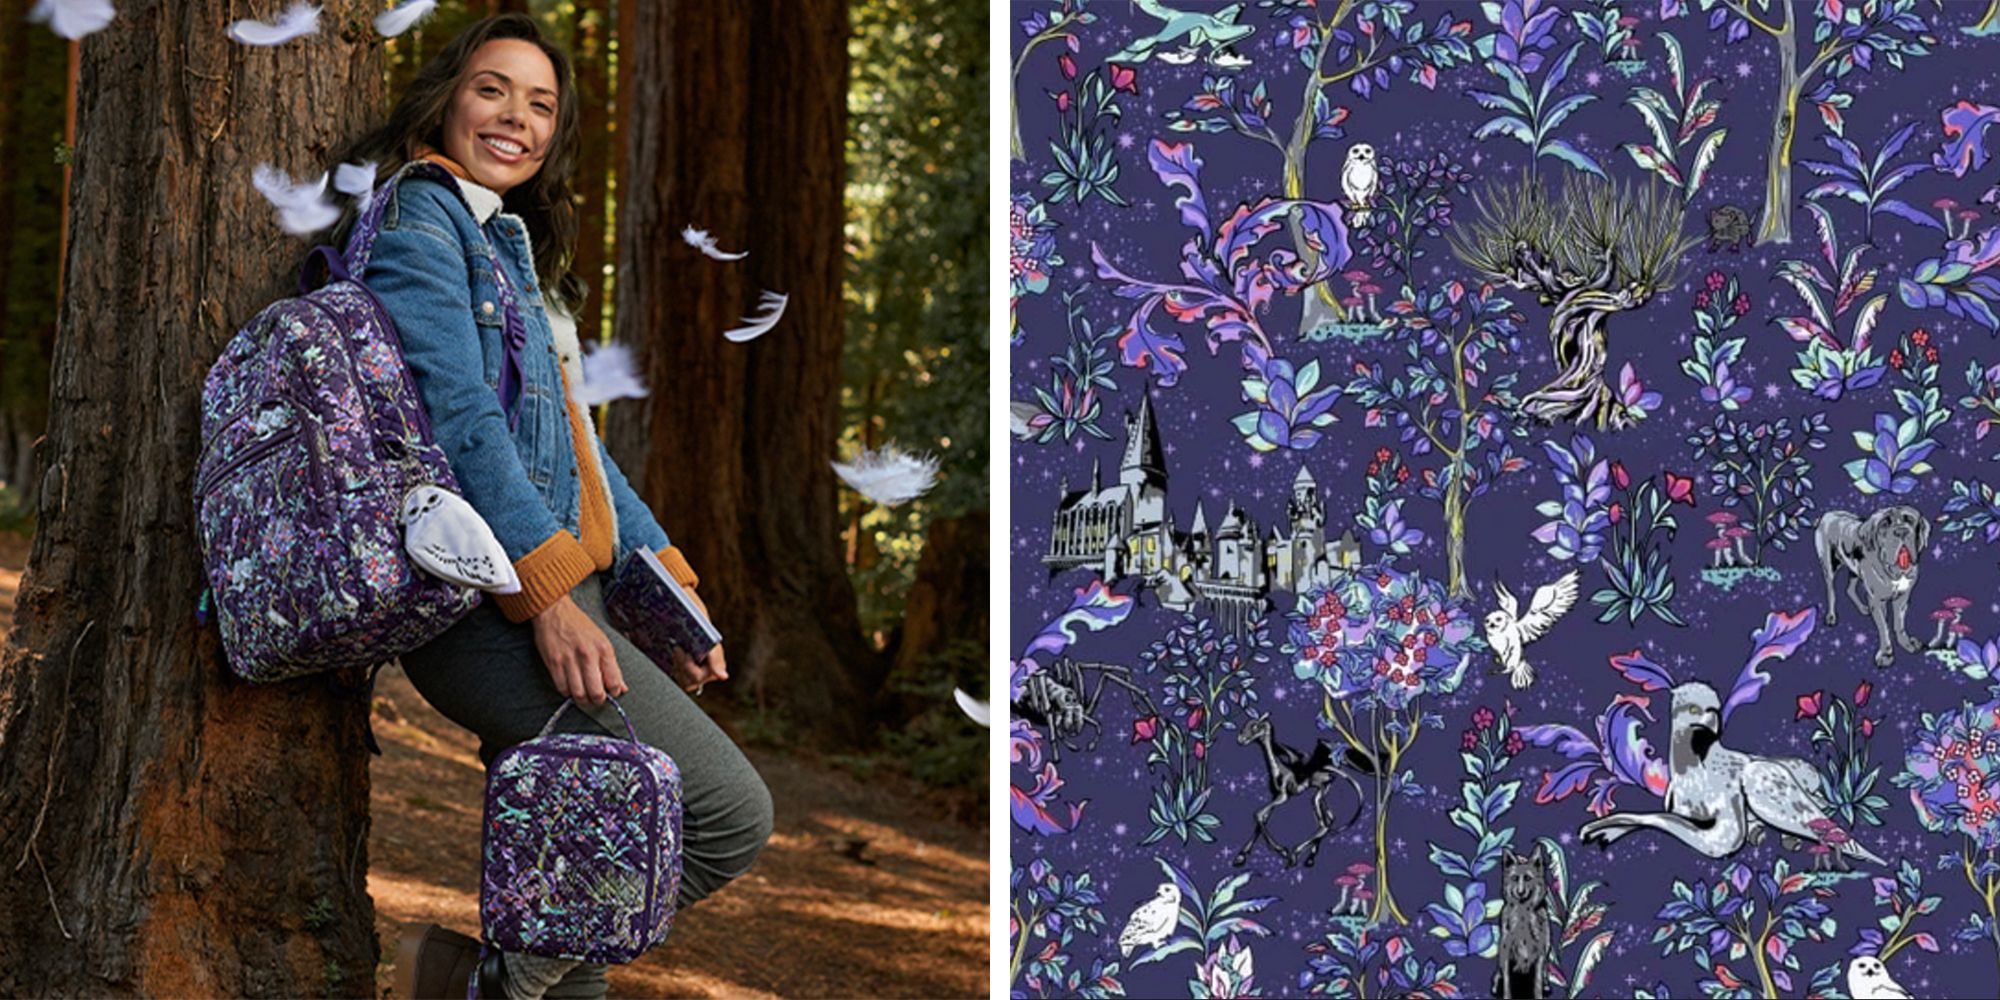 Vera Bradley Just Released Its Third 'Harry Potter' Collection With a New  Forbidden Forest Pattern